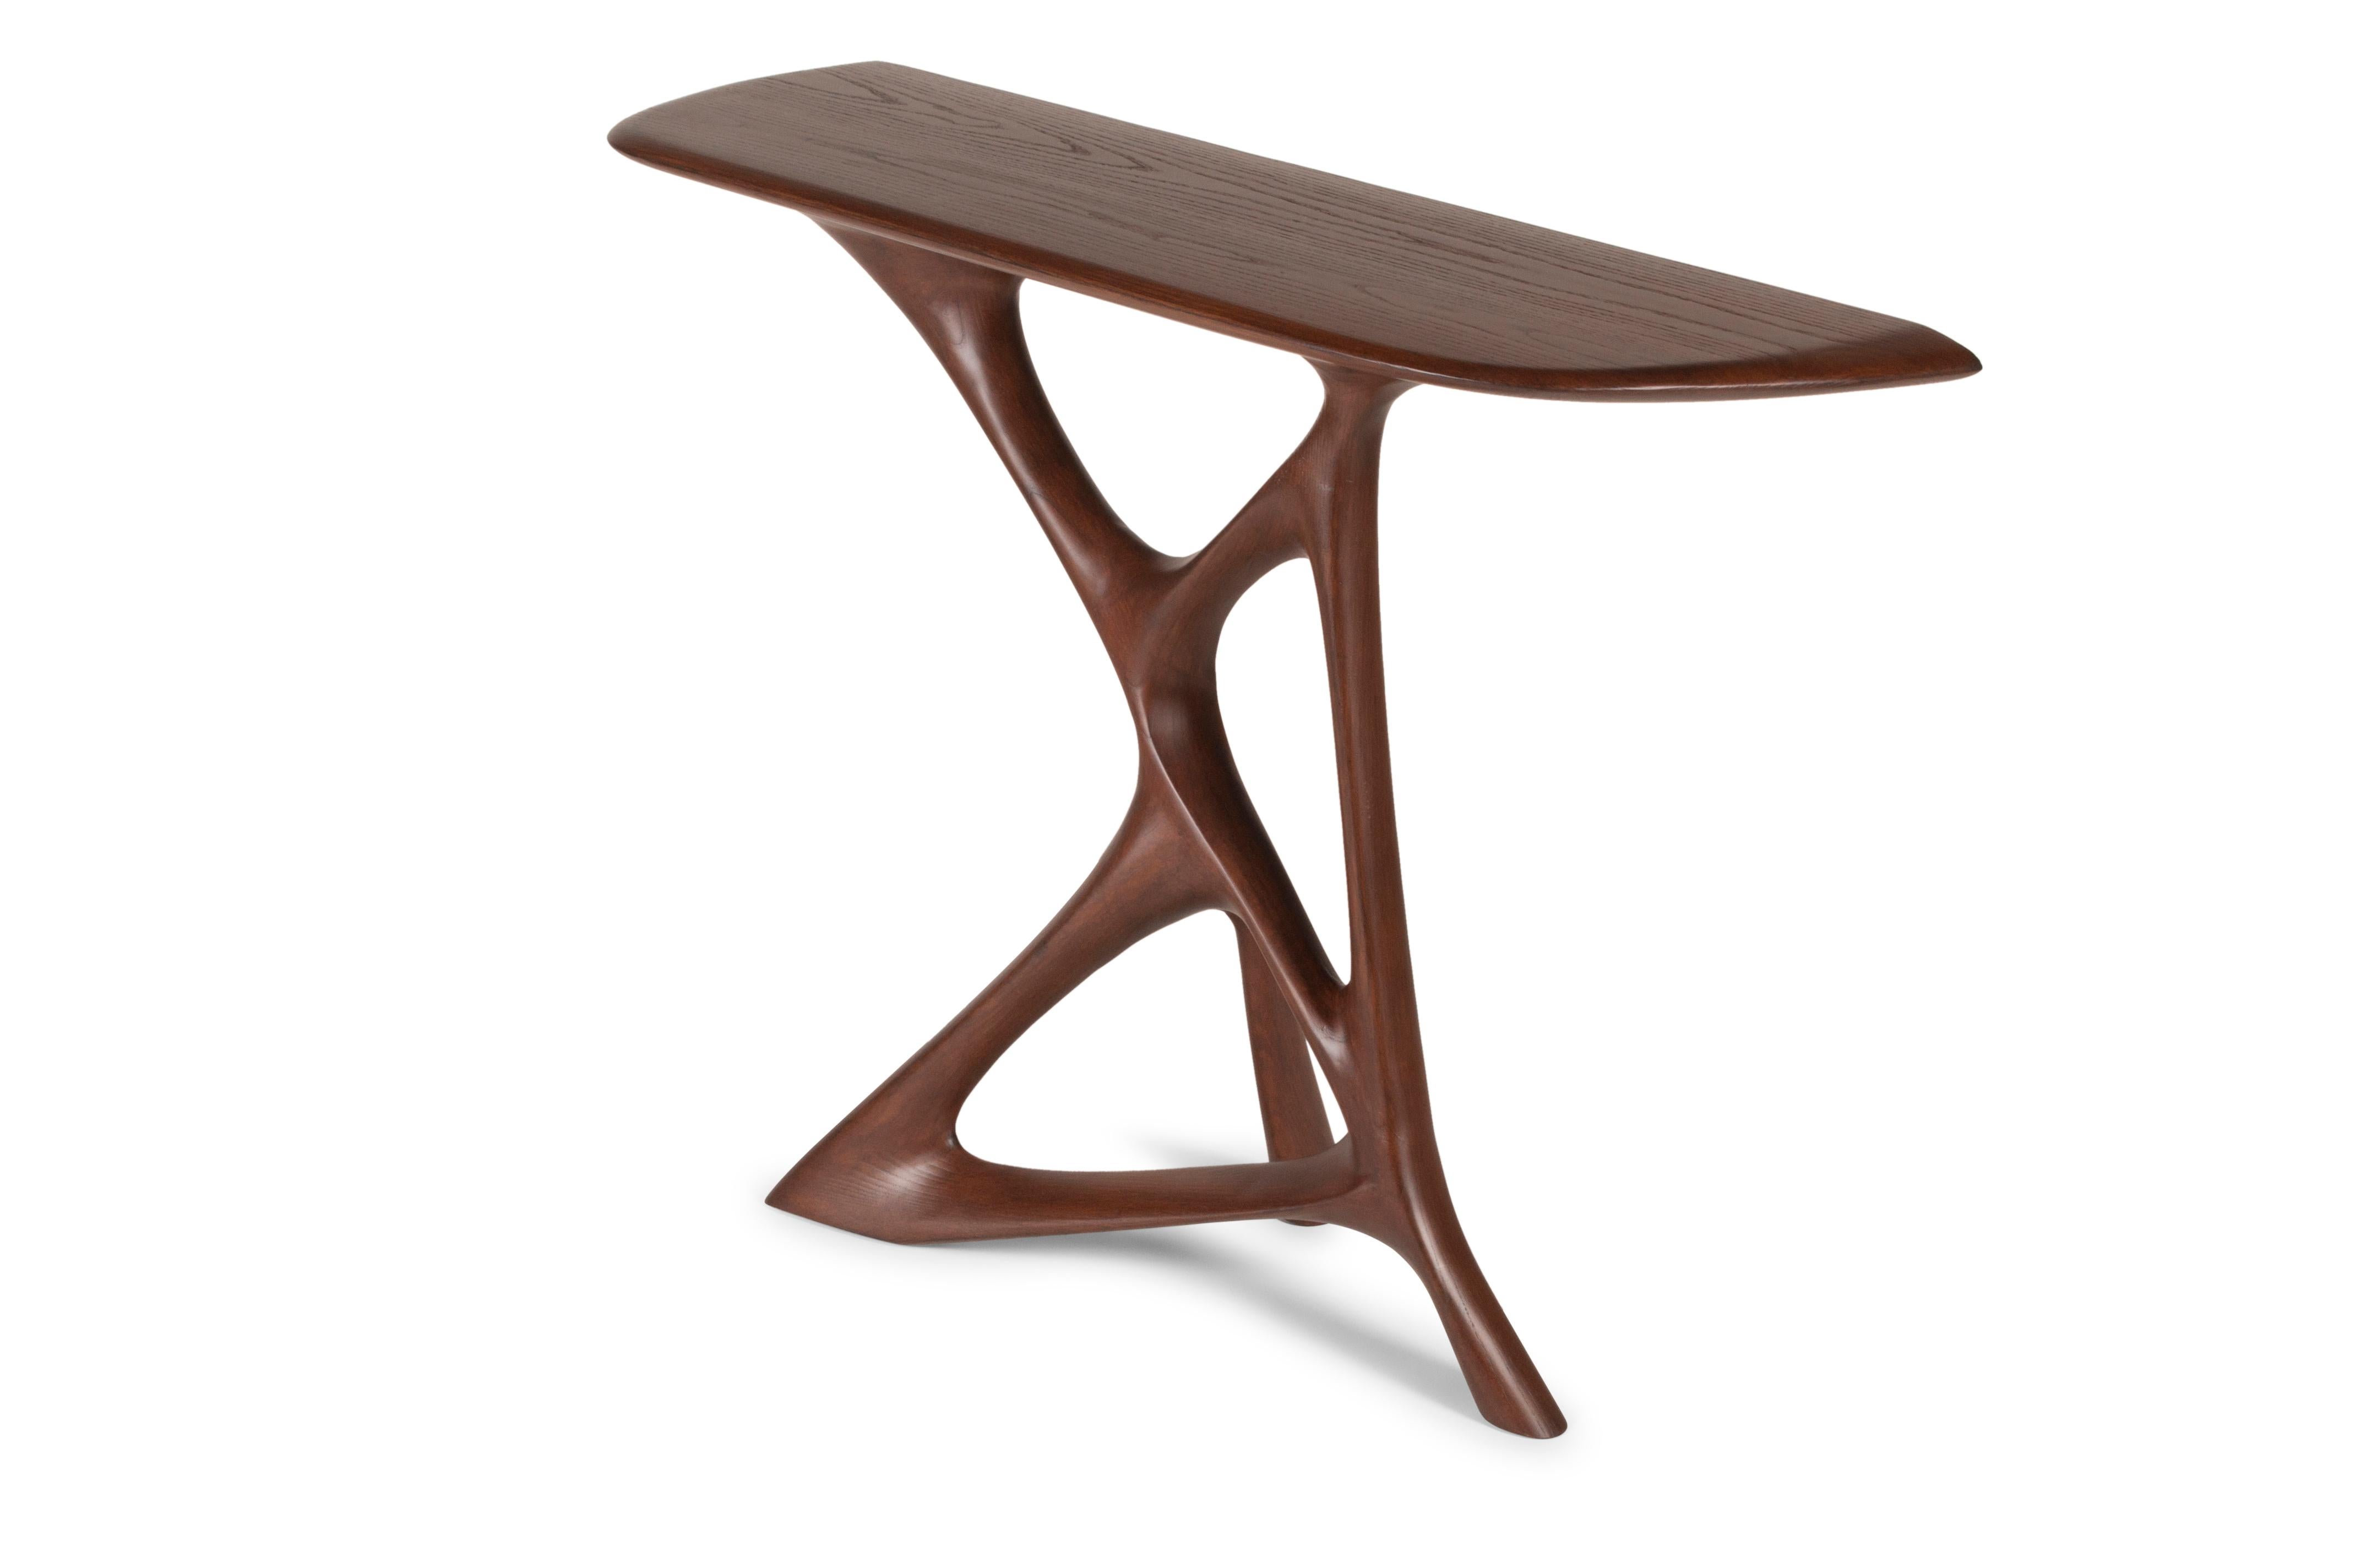 Modern Amorph Anika Console table in Walnut stain on Ash wood For Sale